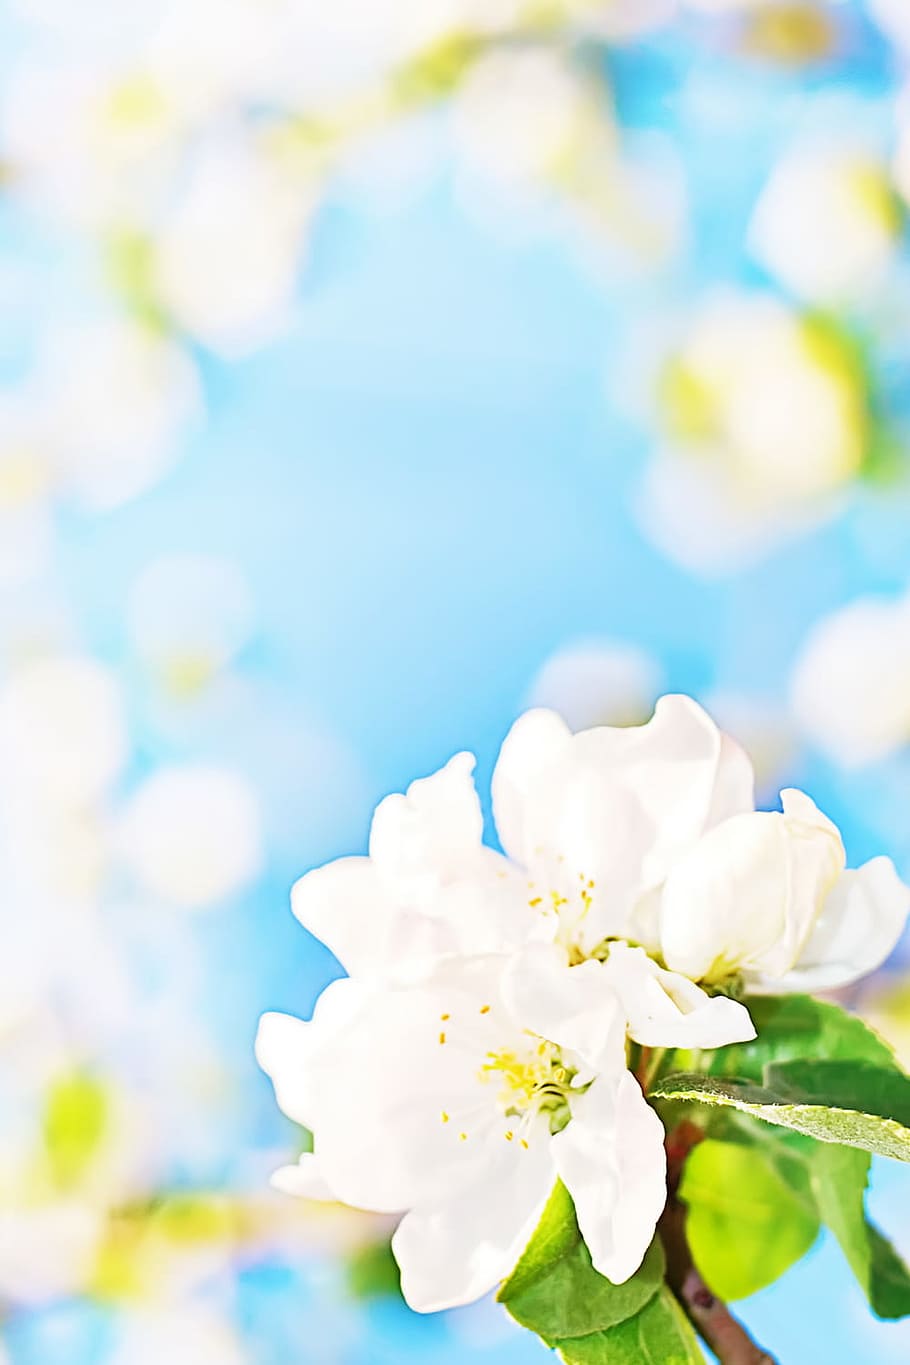 white, flowers, abstract, april, background, beautiful, bloom, blossom, blue, foliage